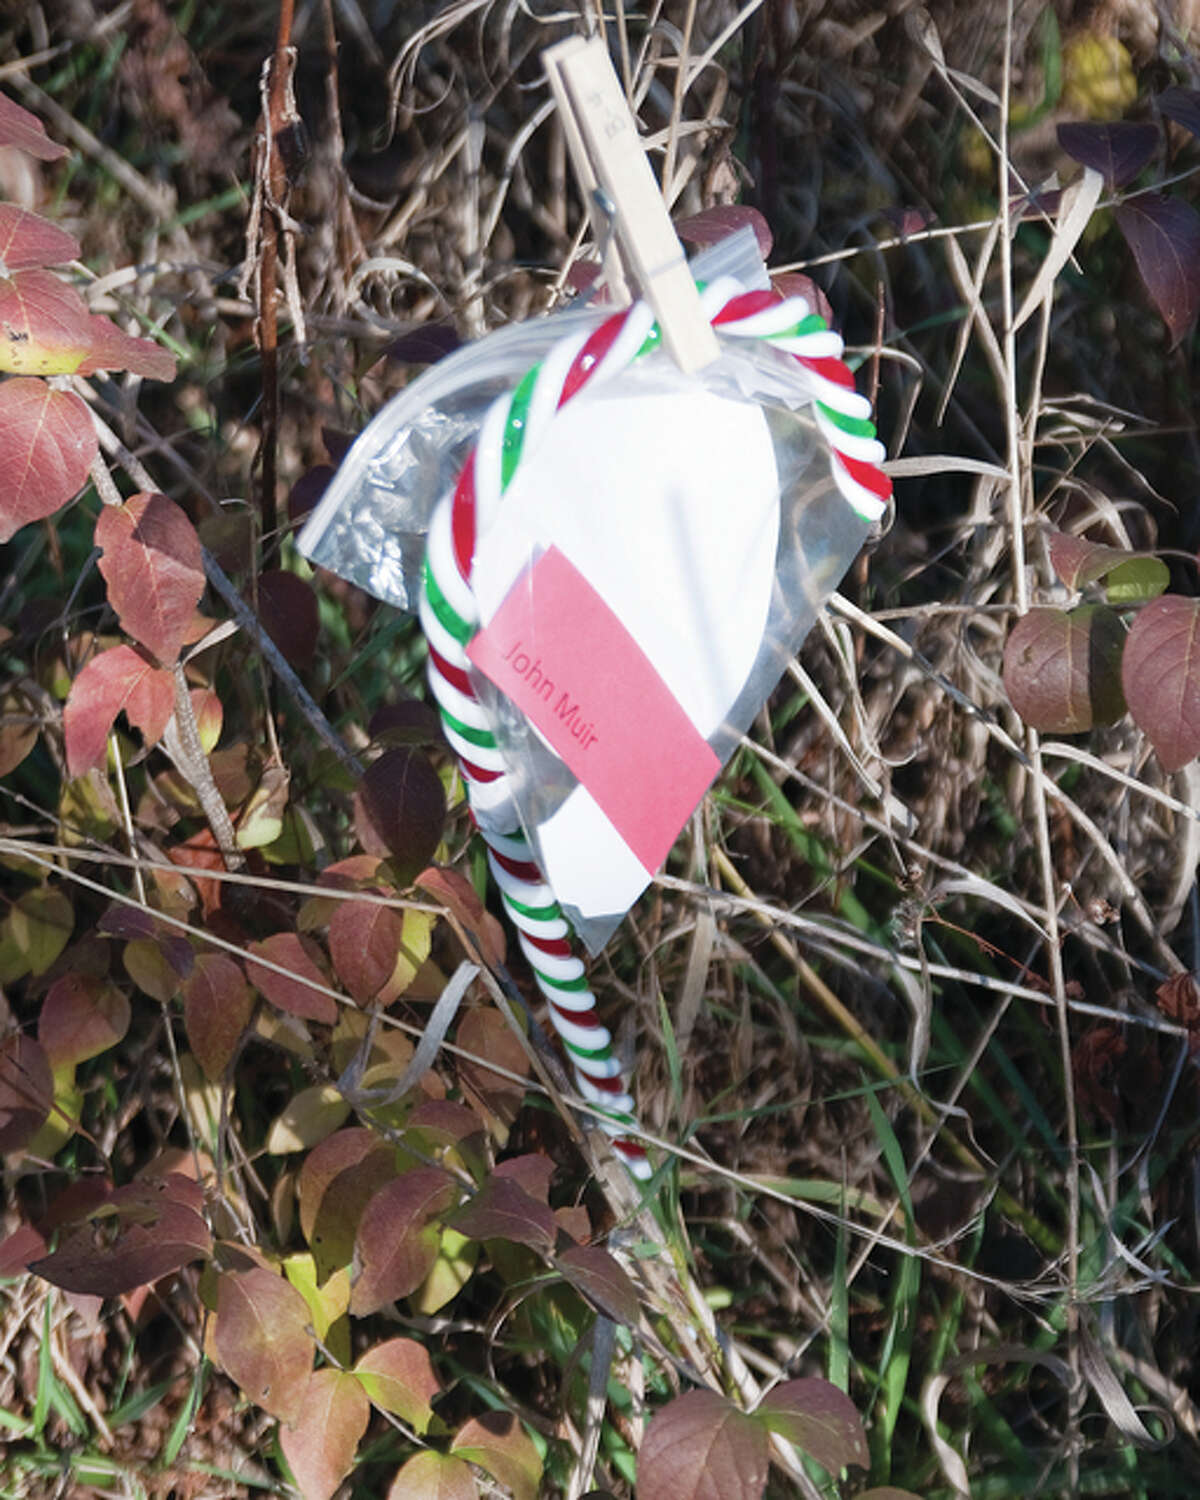 The Candy Cane Challenge was held on Saturday morning at The Nature Institute. Teams were able to use a GPS locator or a compass out on The Nature Institute Trails, to locate all of the eight candy canes.